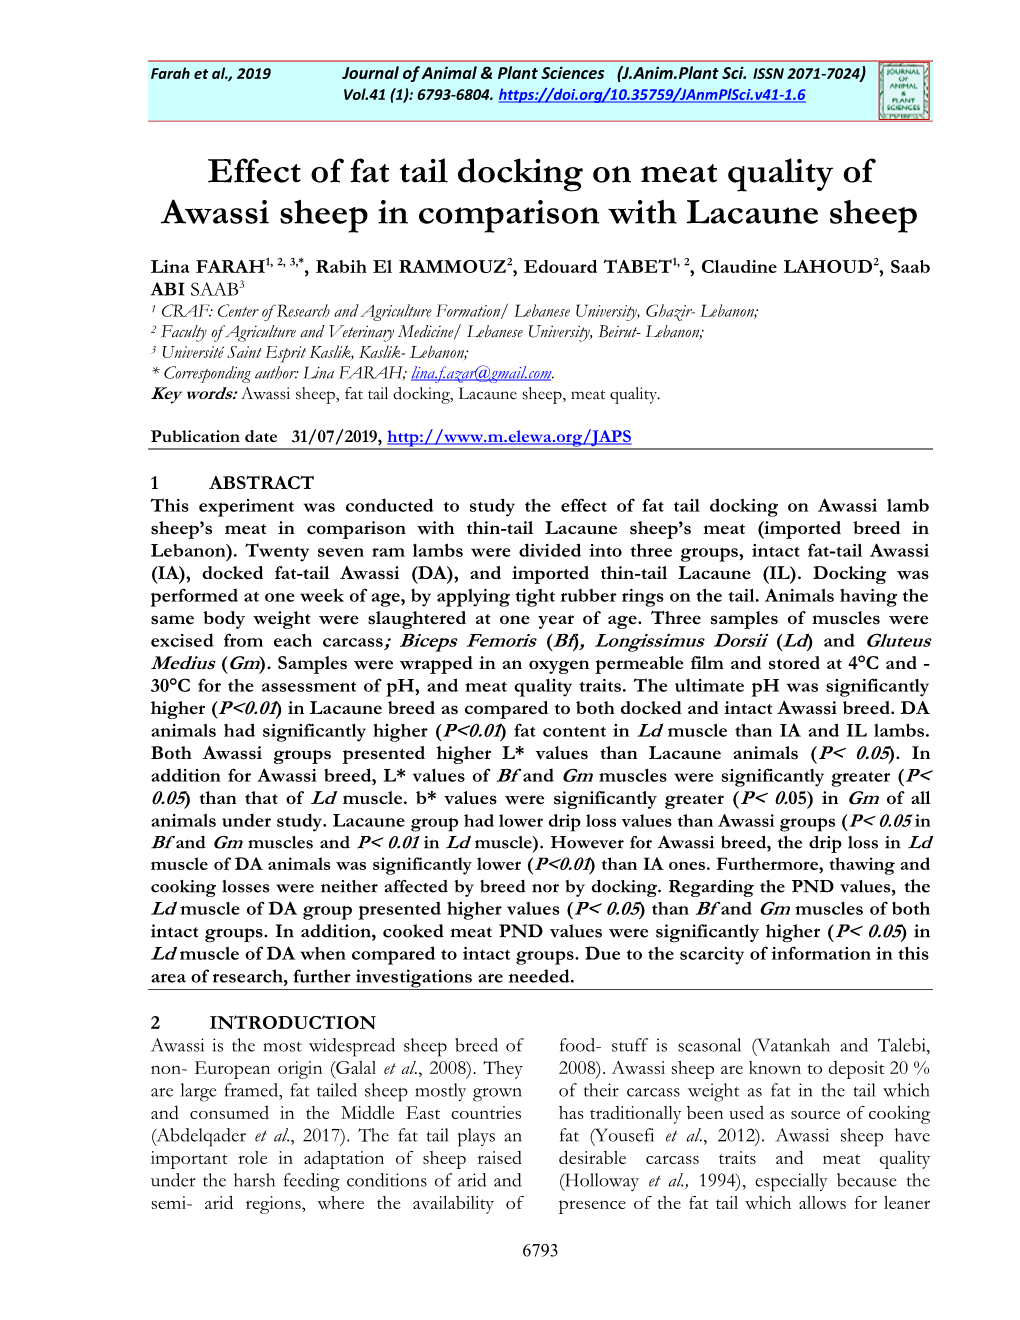 Effect of Fat Tail Docking on Meat Quality of Awassi Sheep in Comparison with Lacaune Sheep